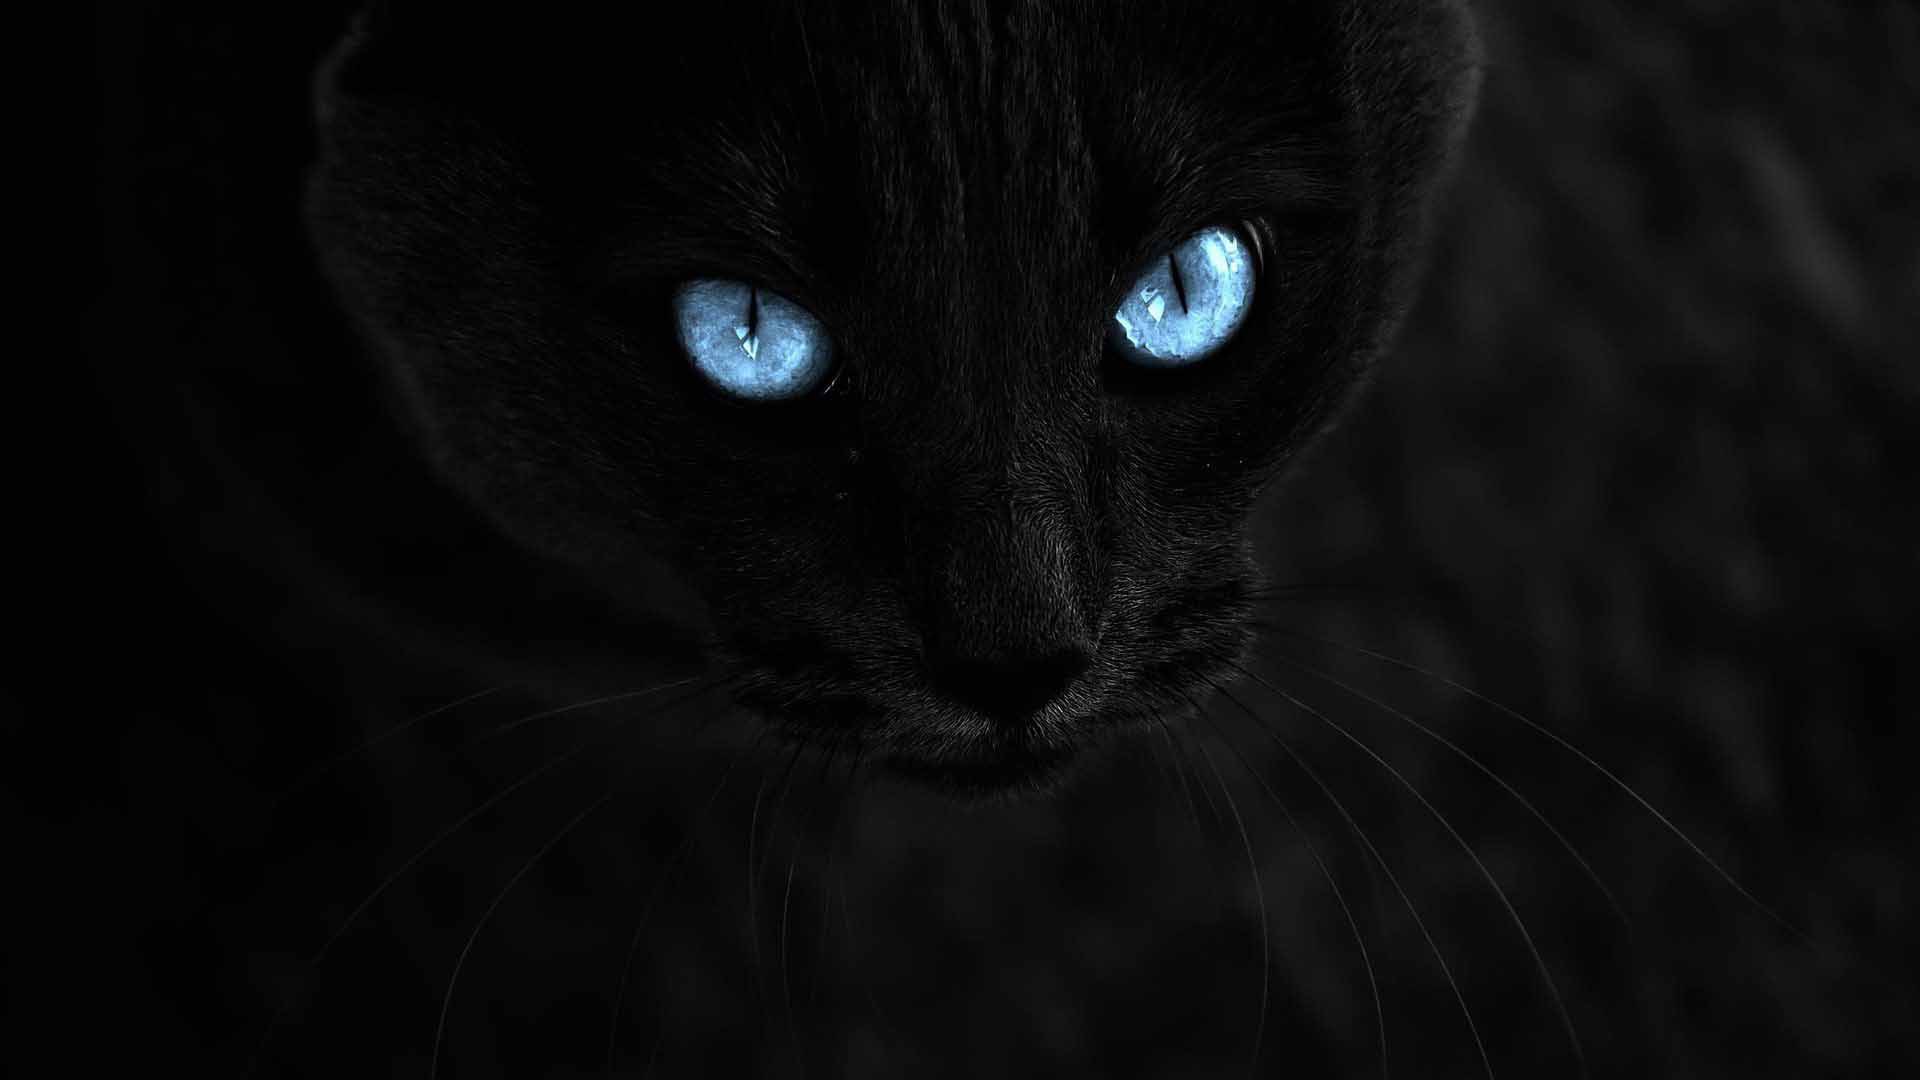 Black cat with blue eyes on a black background wallpapers and images 1920x1080